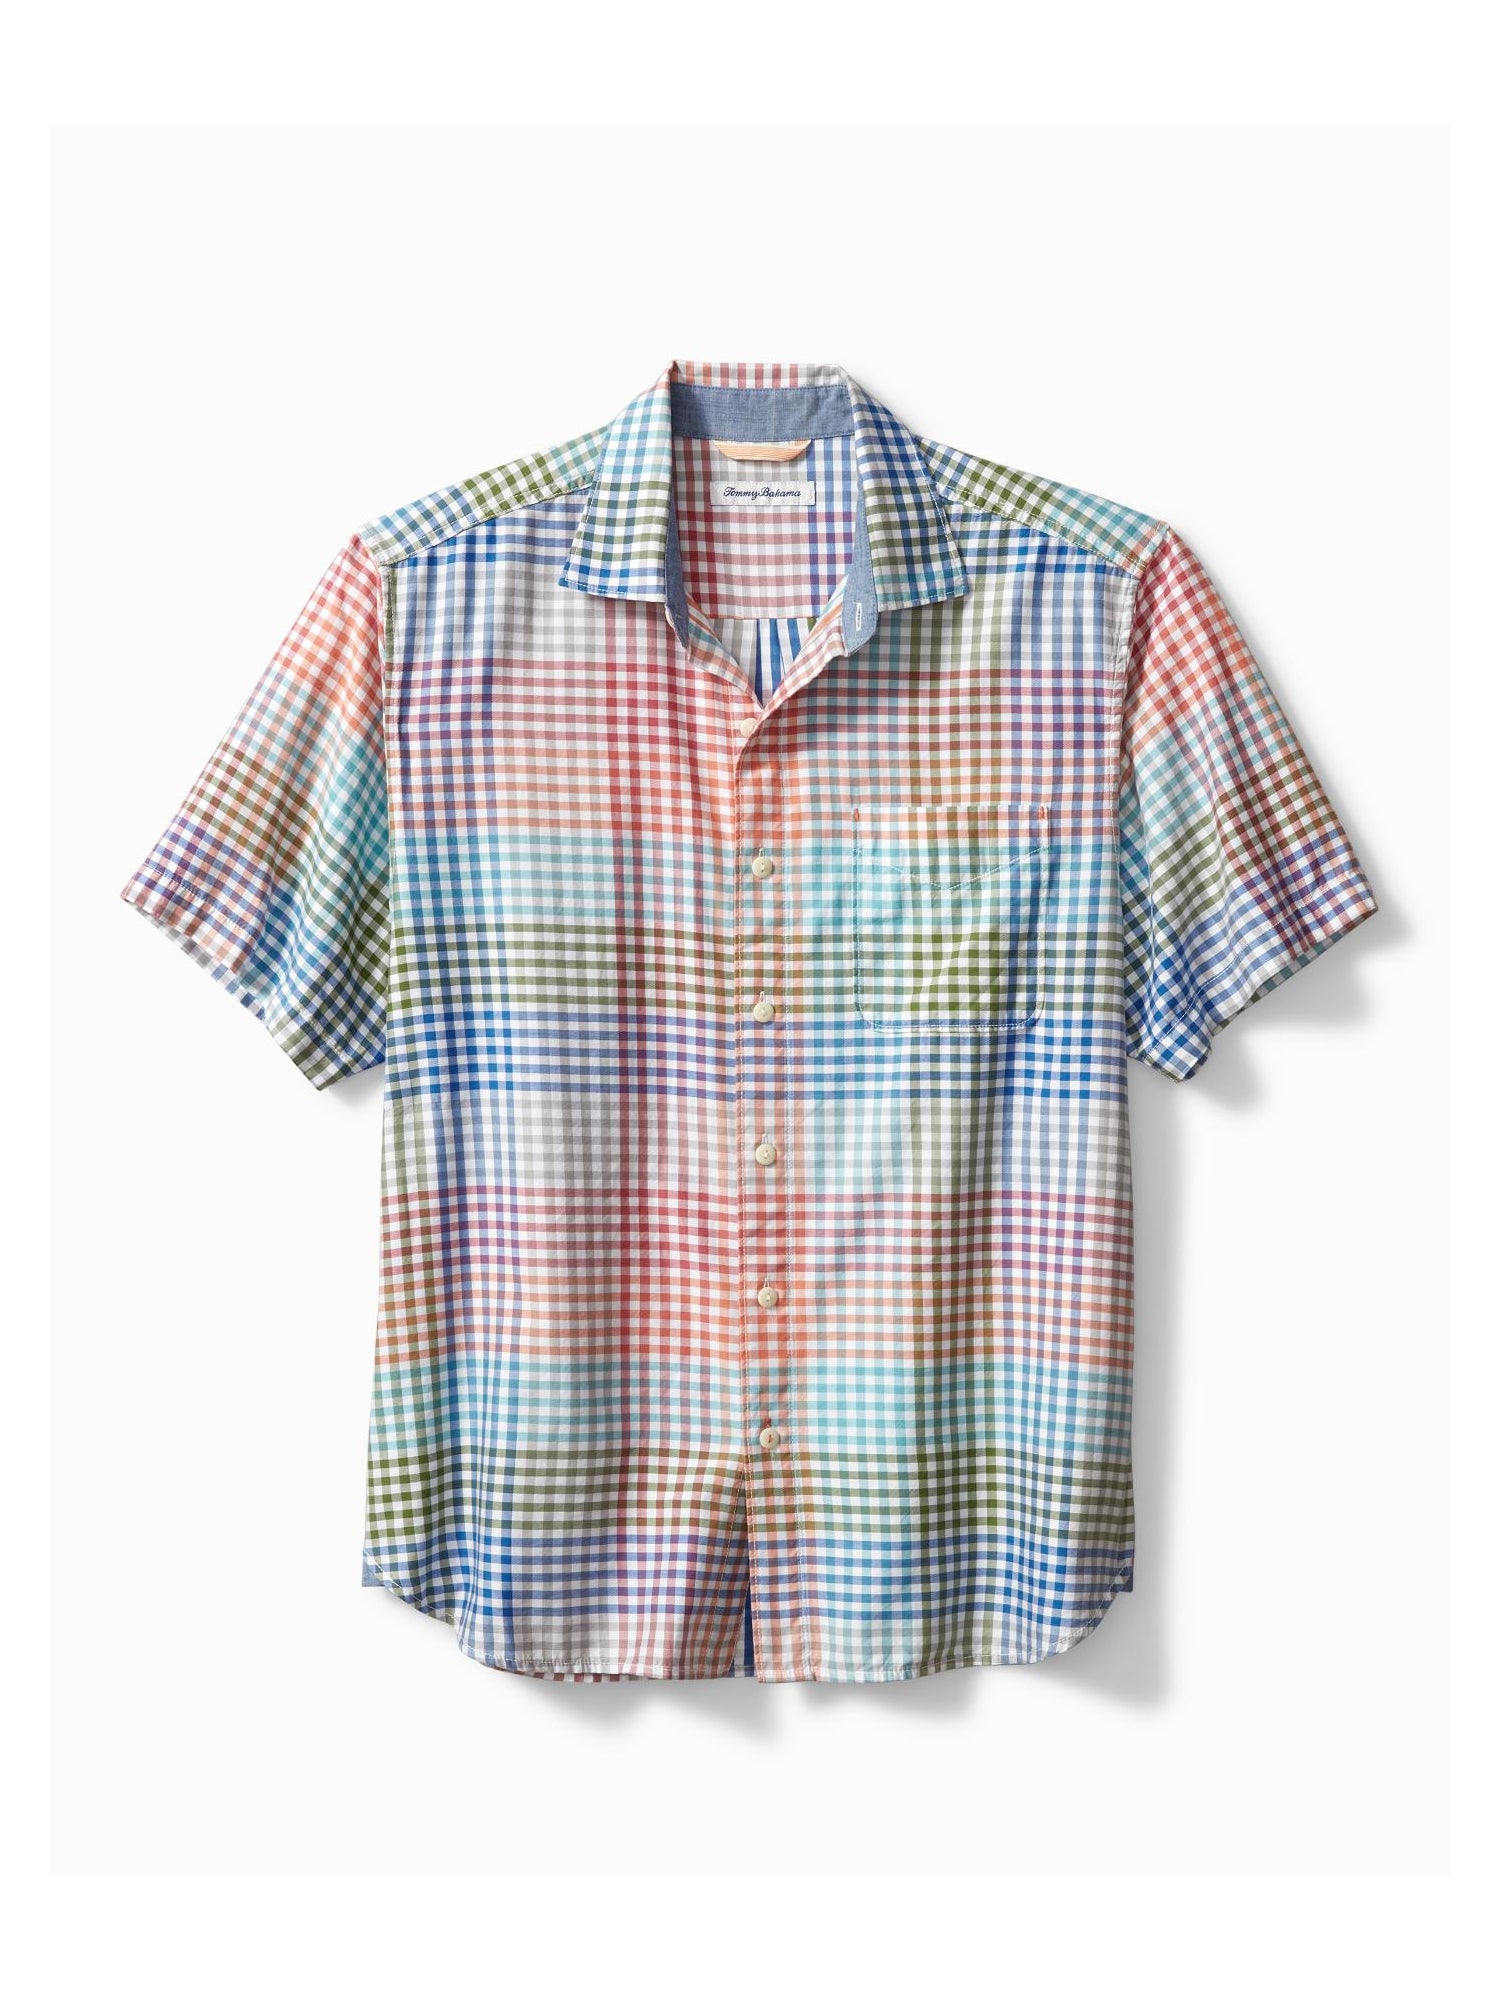 Tommy Bahama Grand View Gingham Camp Shirt